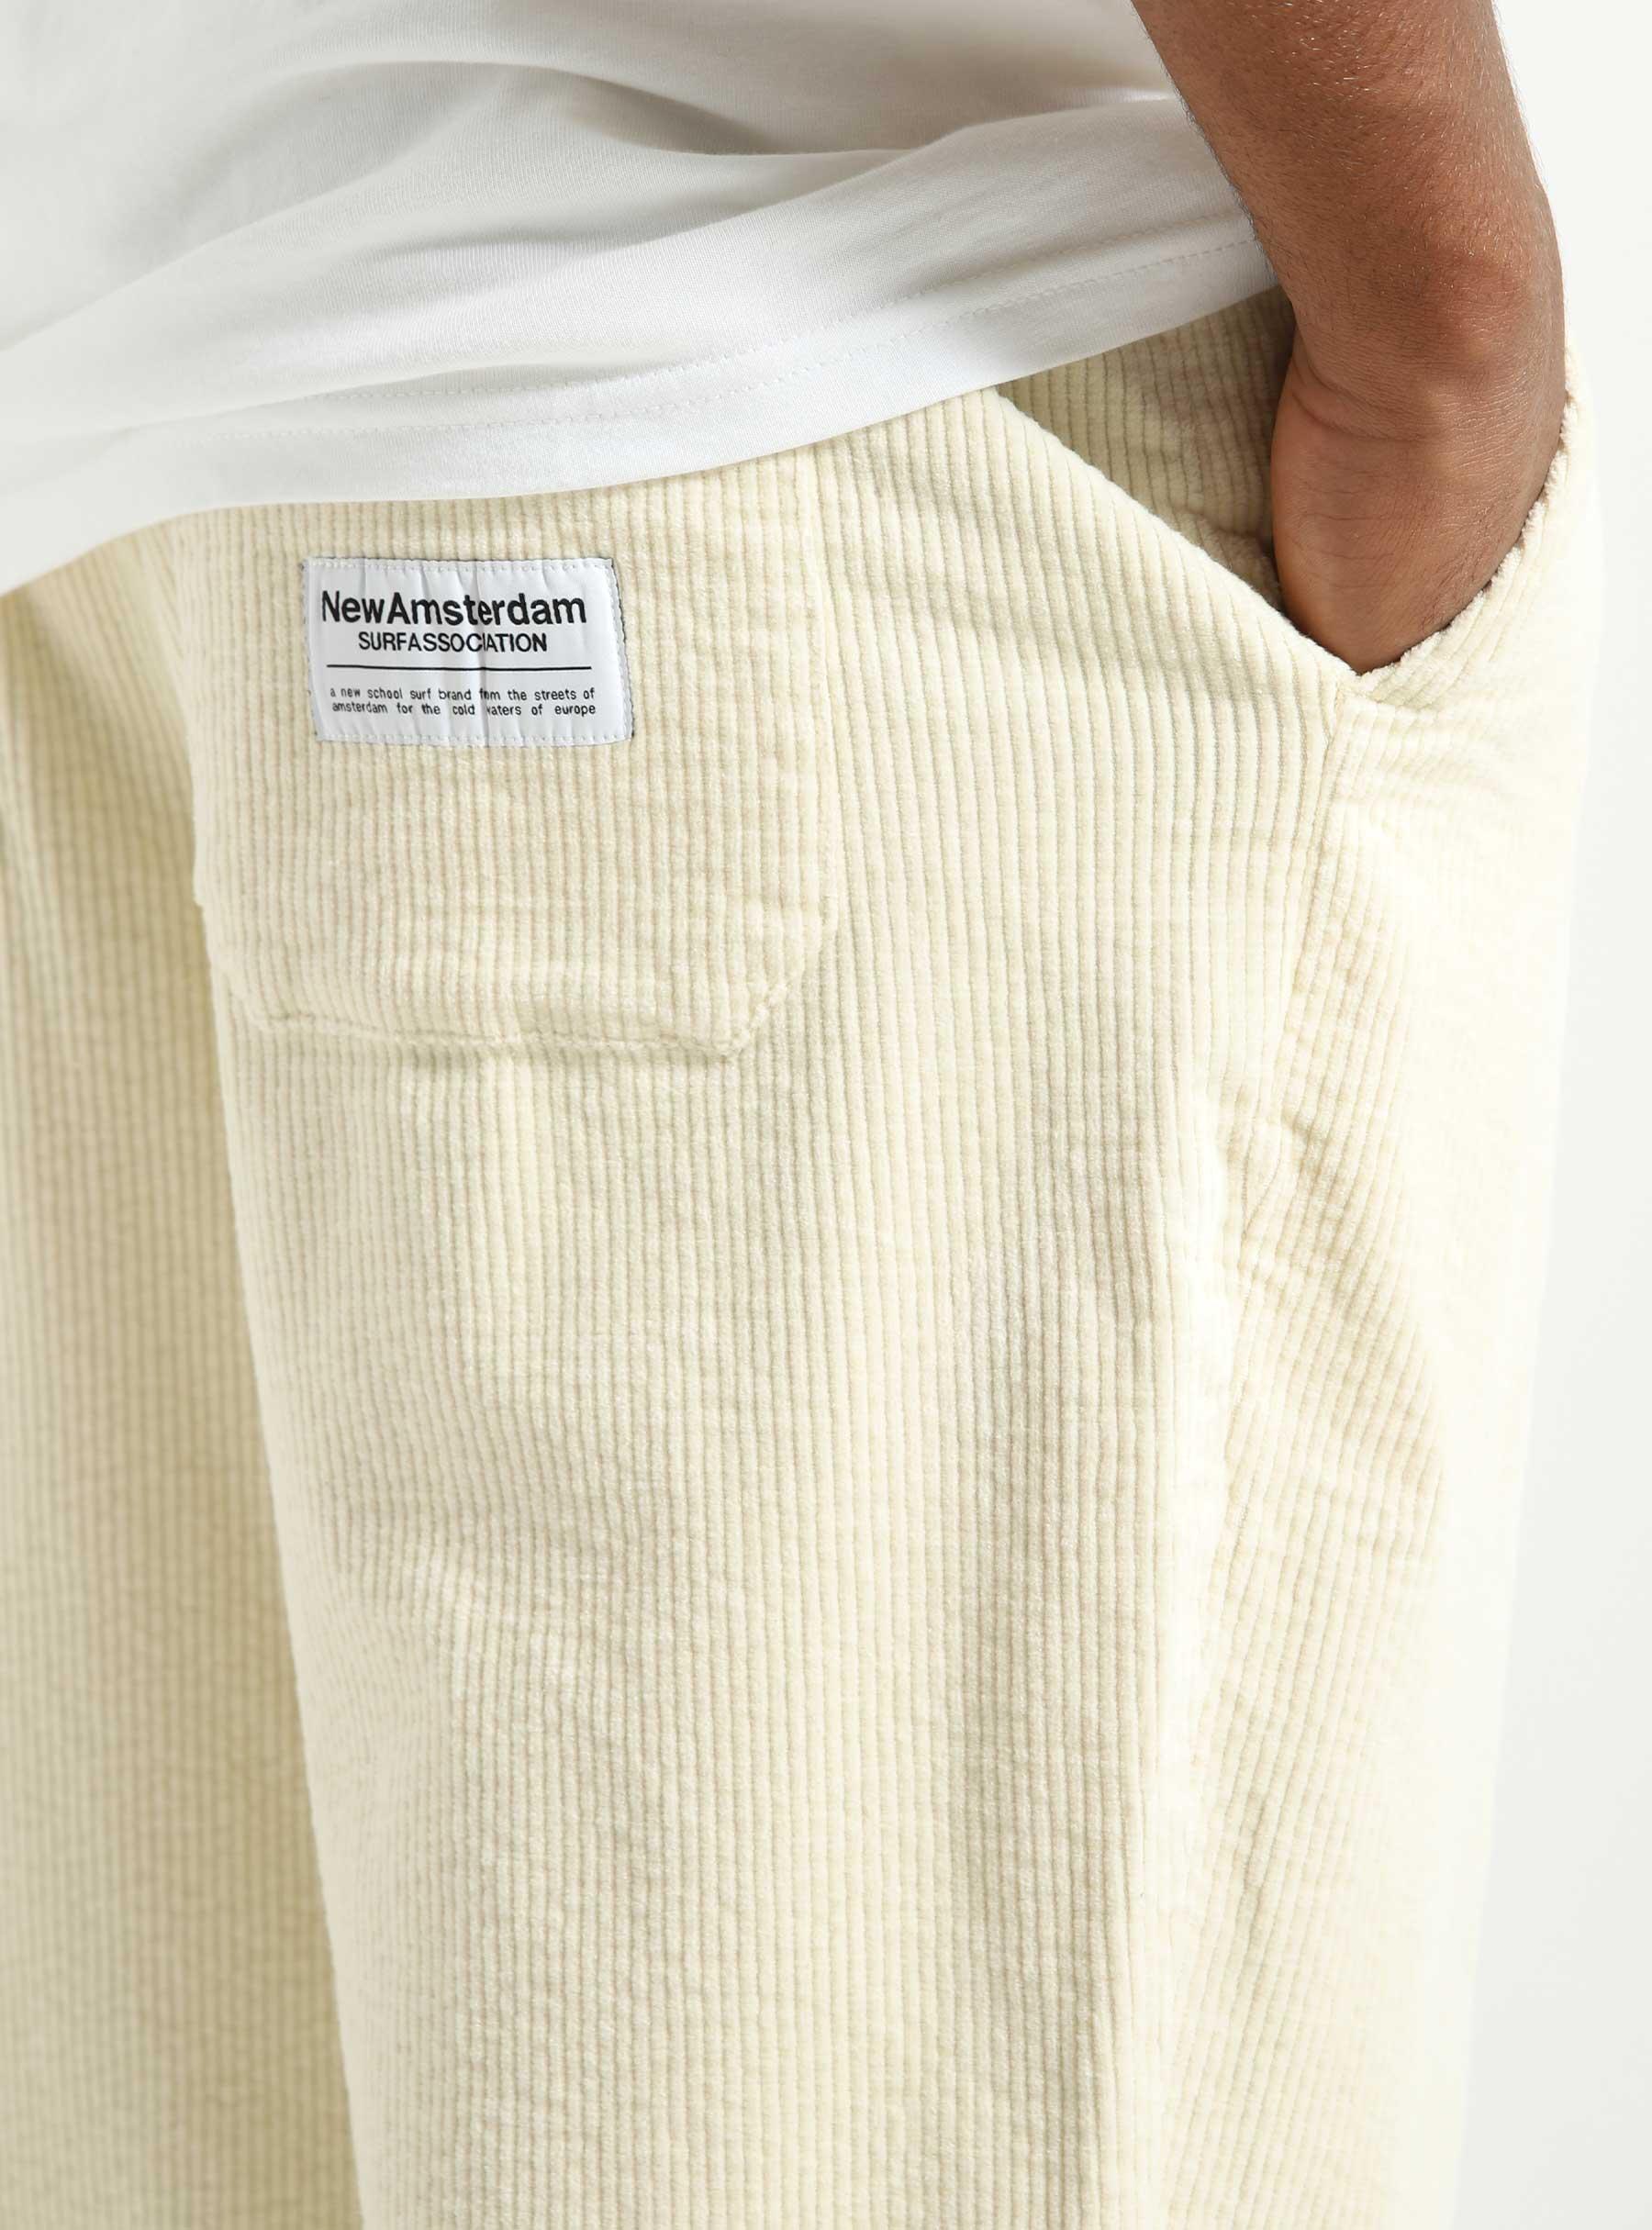 Work Trouser Cord Off White 2302028006